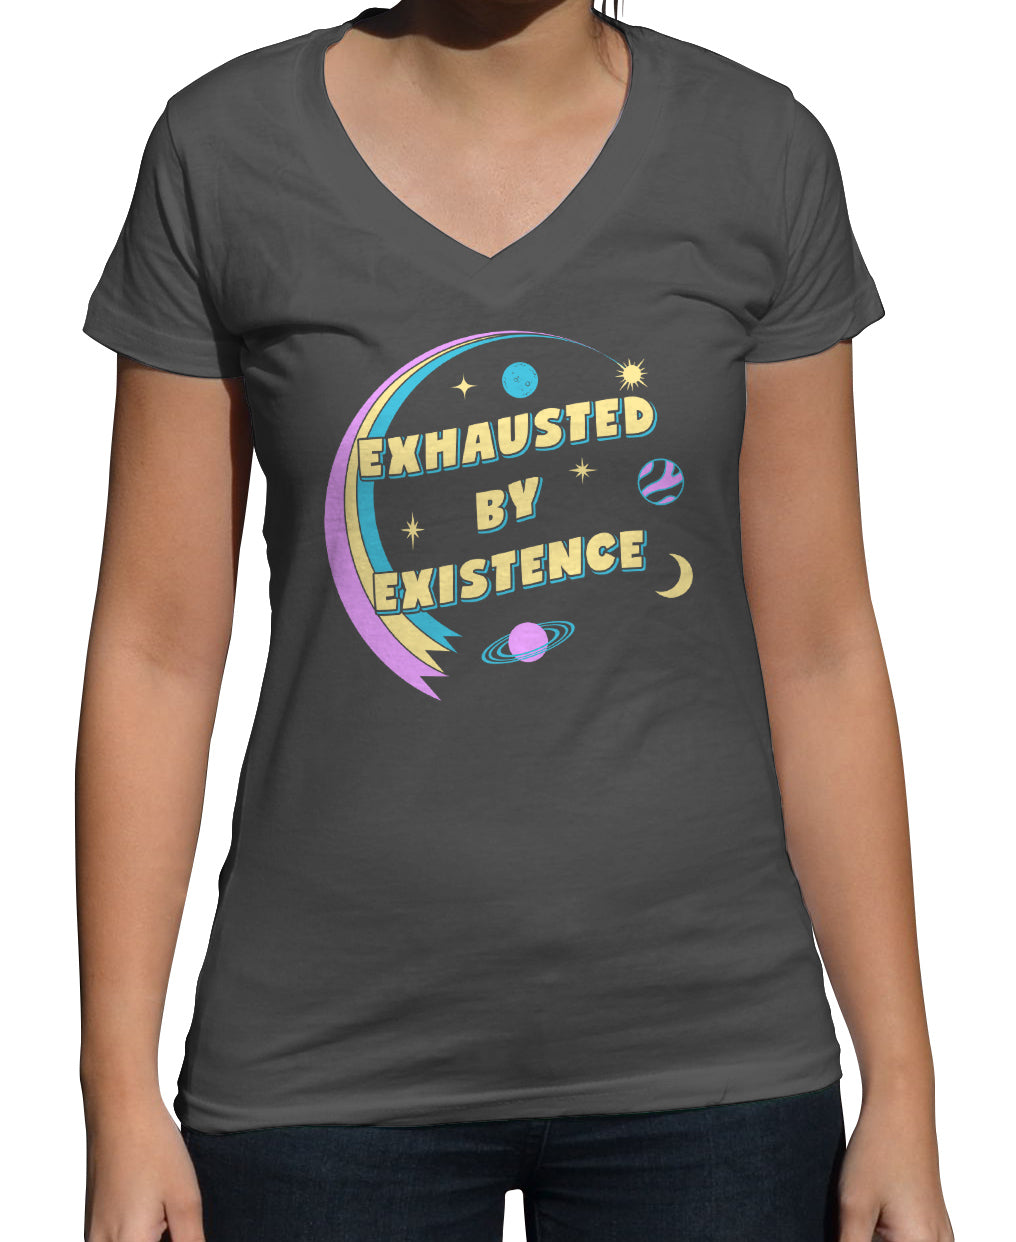 Women's Exhausted By Existence Vneck T-Shirt